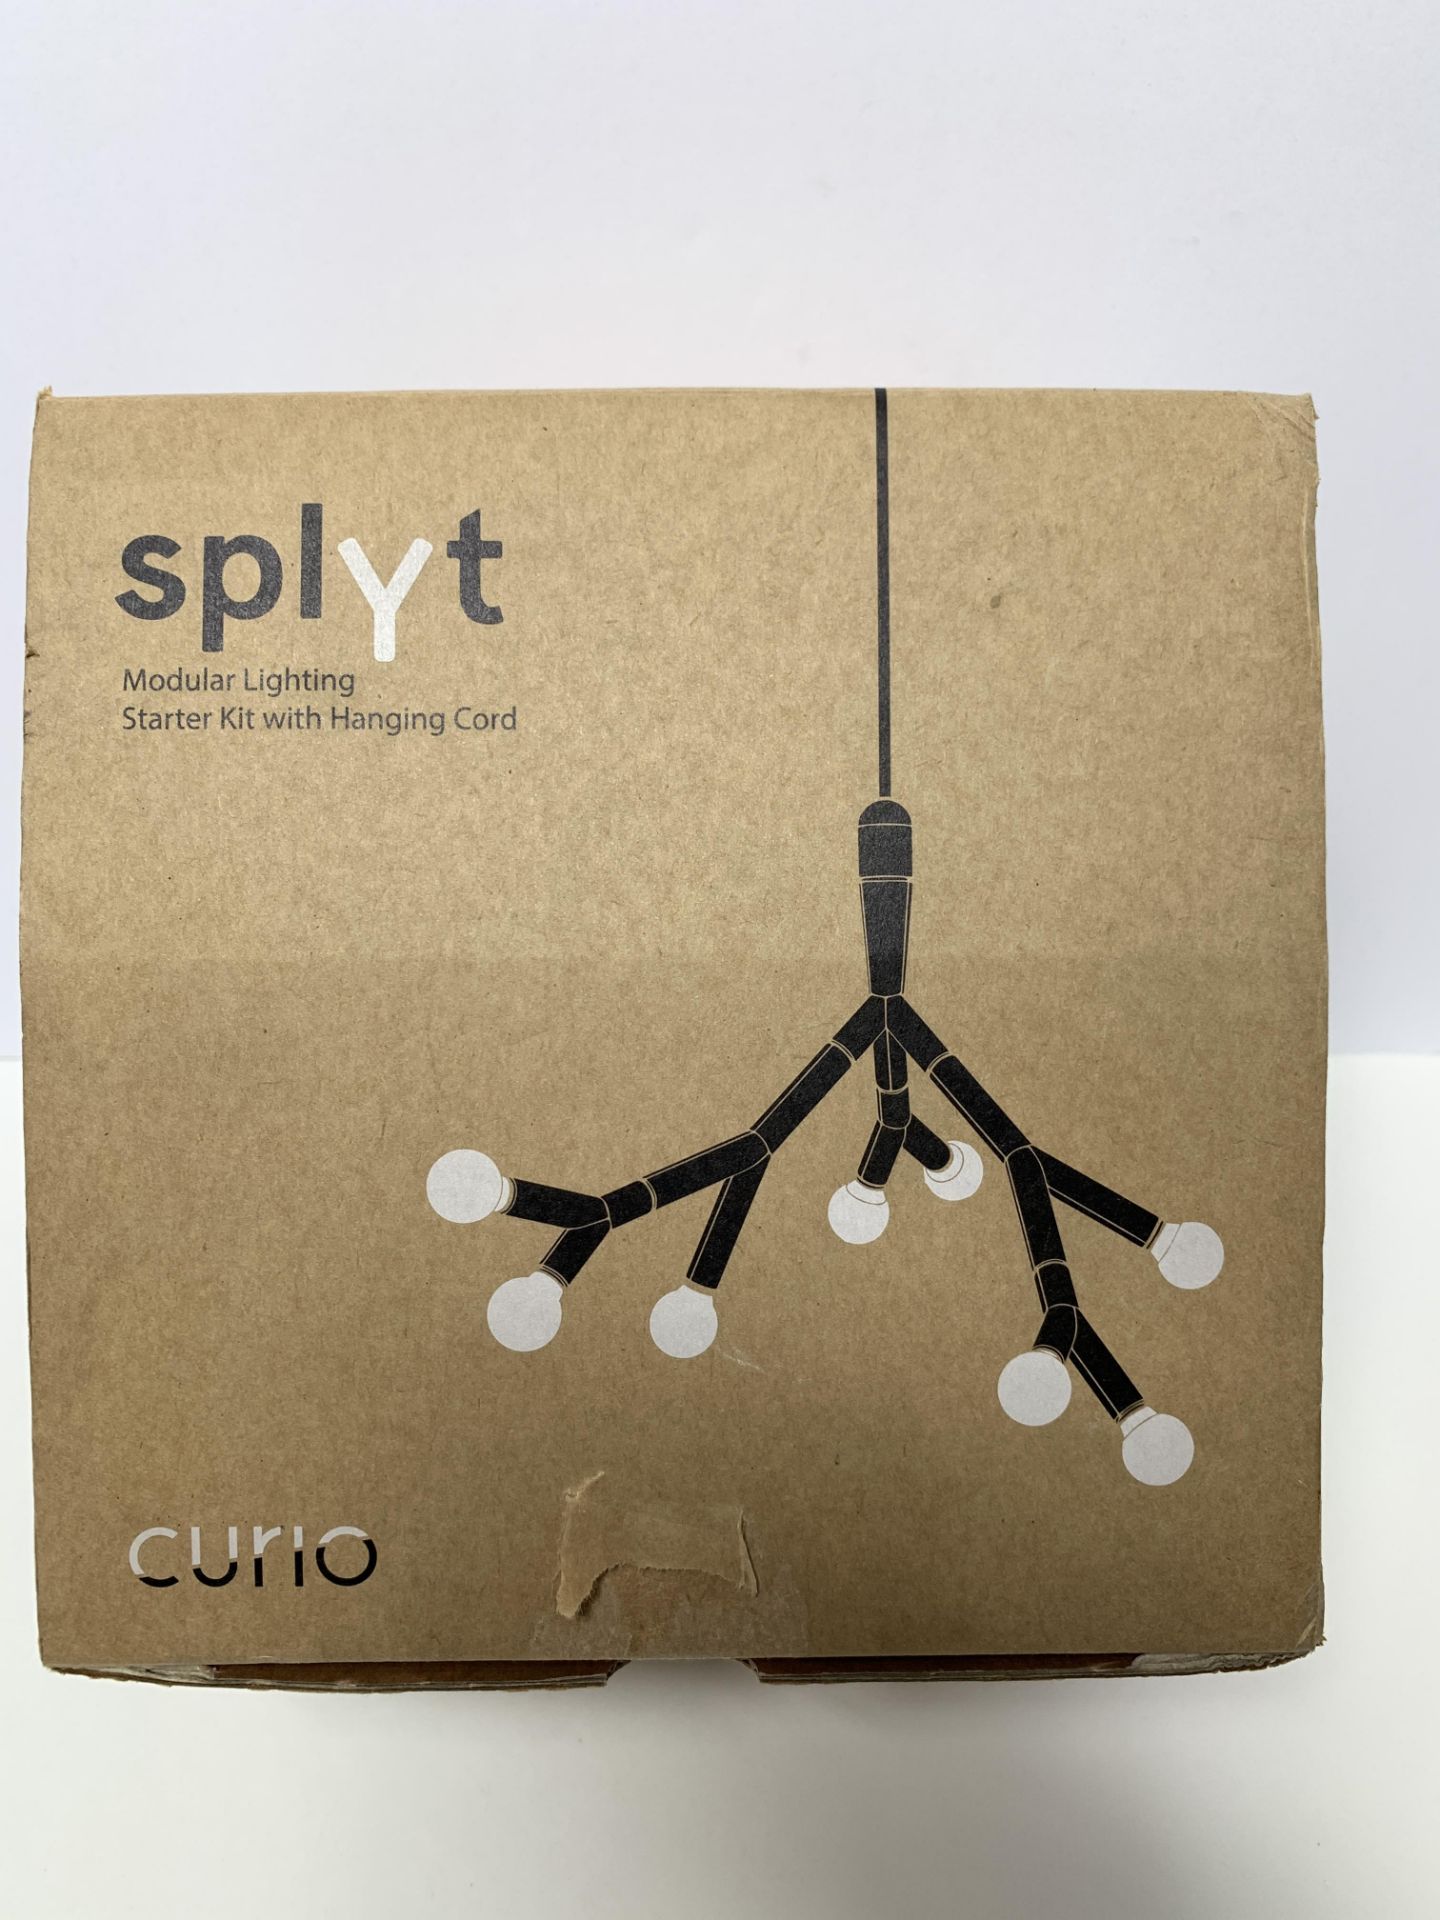 SPLYT CURIO MODULAR LIGHTING KIT WITH HANGING CORD, NEW IN BOX